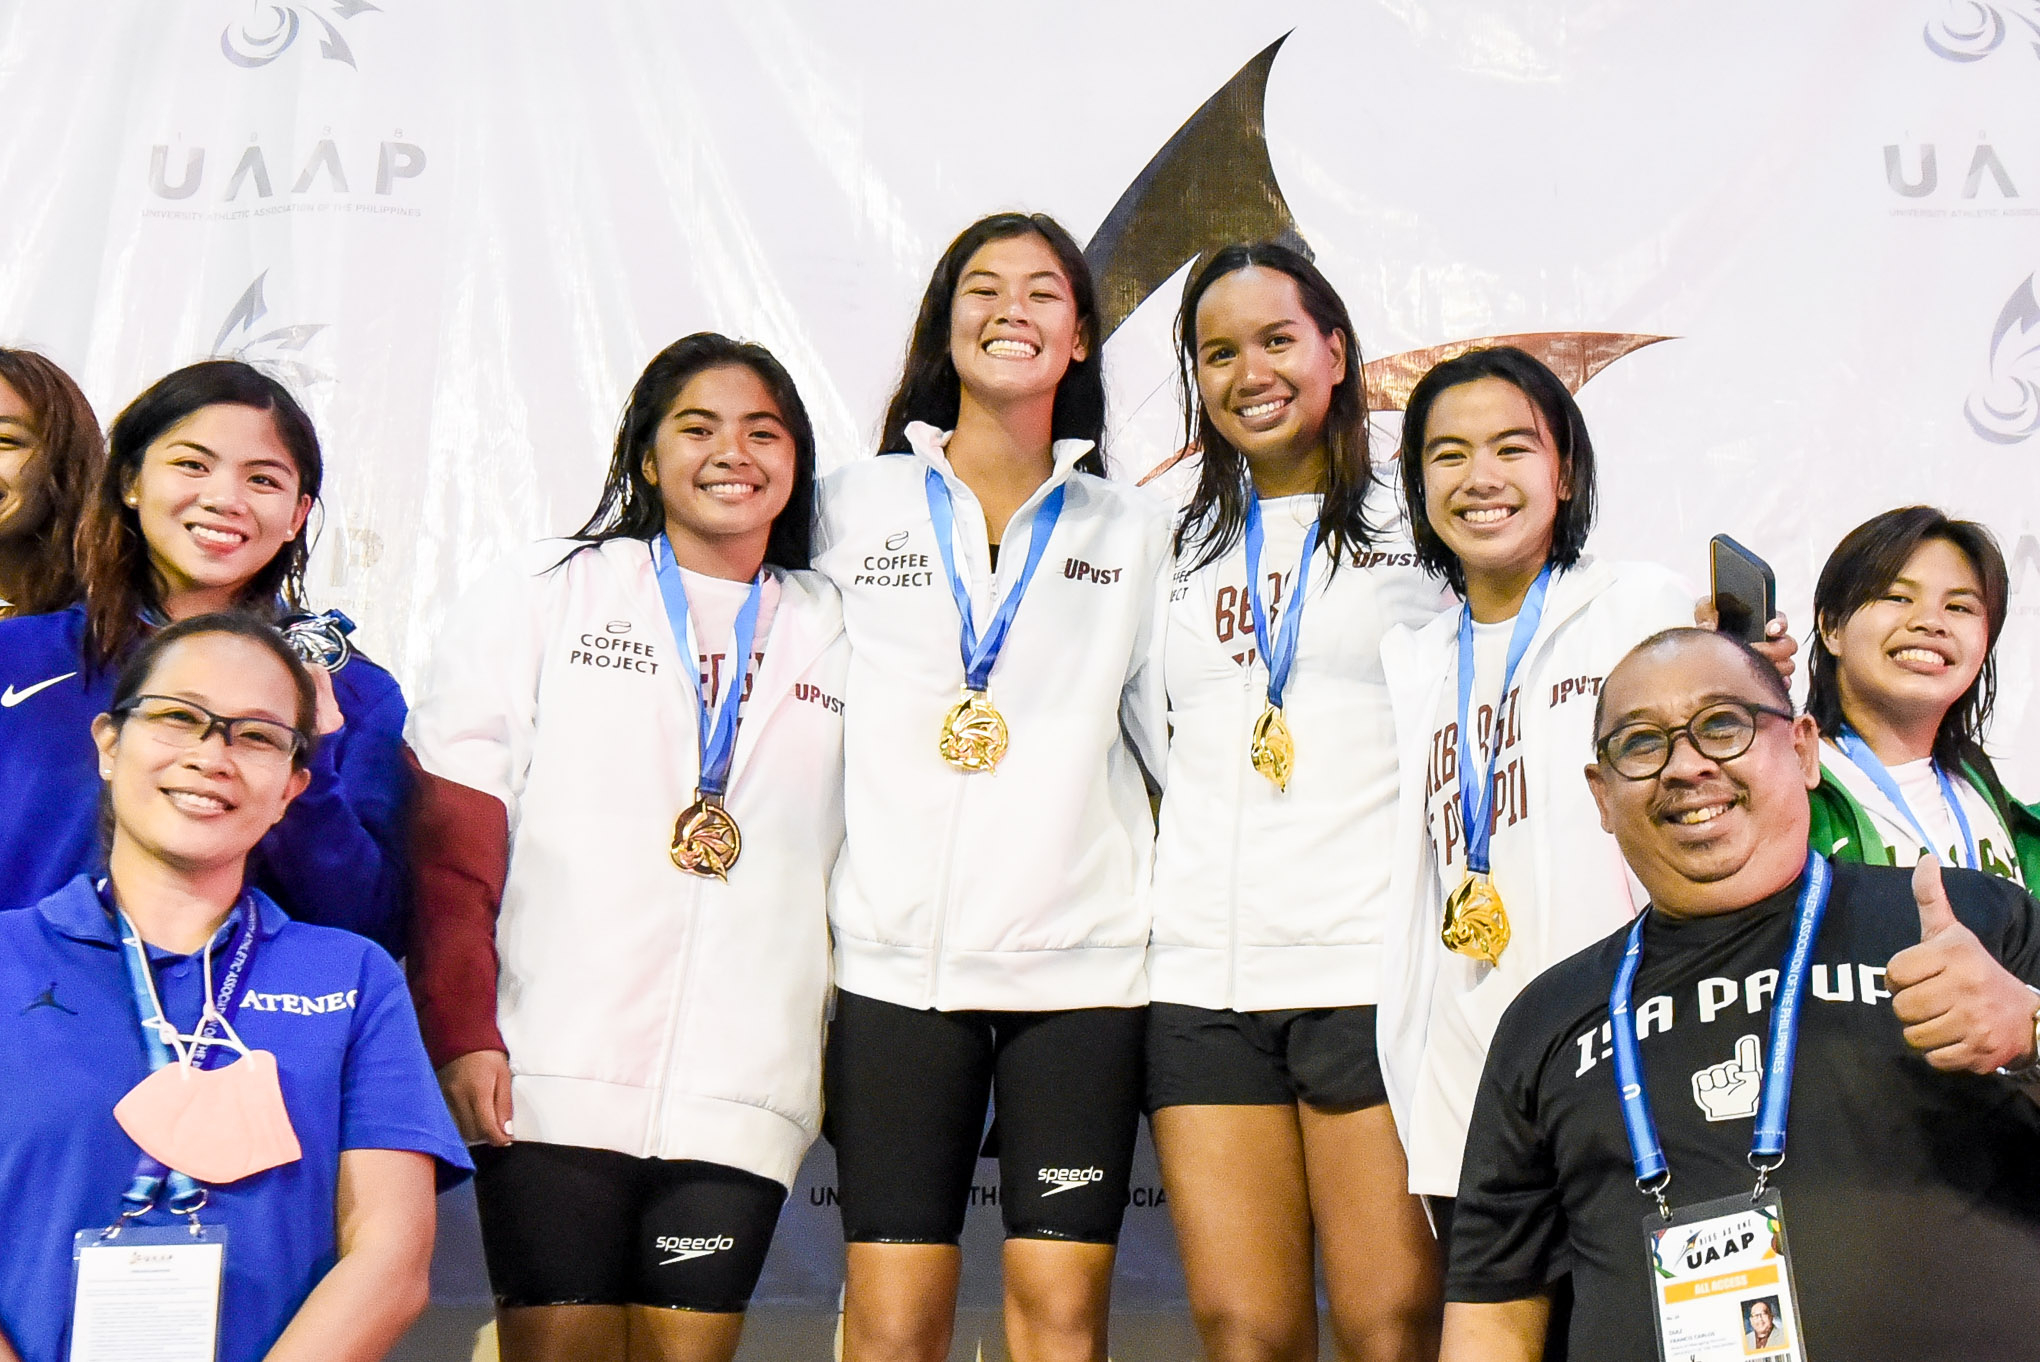 4X100-LC-FREESTYLE-RELAY-WOMENS-CHAMPION-UP-ANN-PURISIMA-MARY-LACSON-GENE-QUIAMBAO-ANGELA-VILLAMIL UAAP 86 Swimming: Rian Tirol sets pace for Ateneo, breaks league record in 50m ADMU DLSU News Swimming UAAP UP UST  - philippine sports news